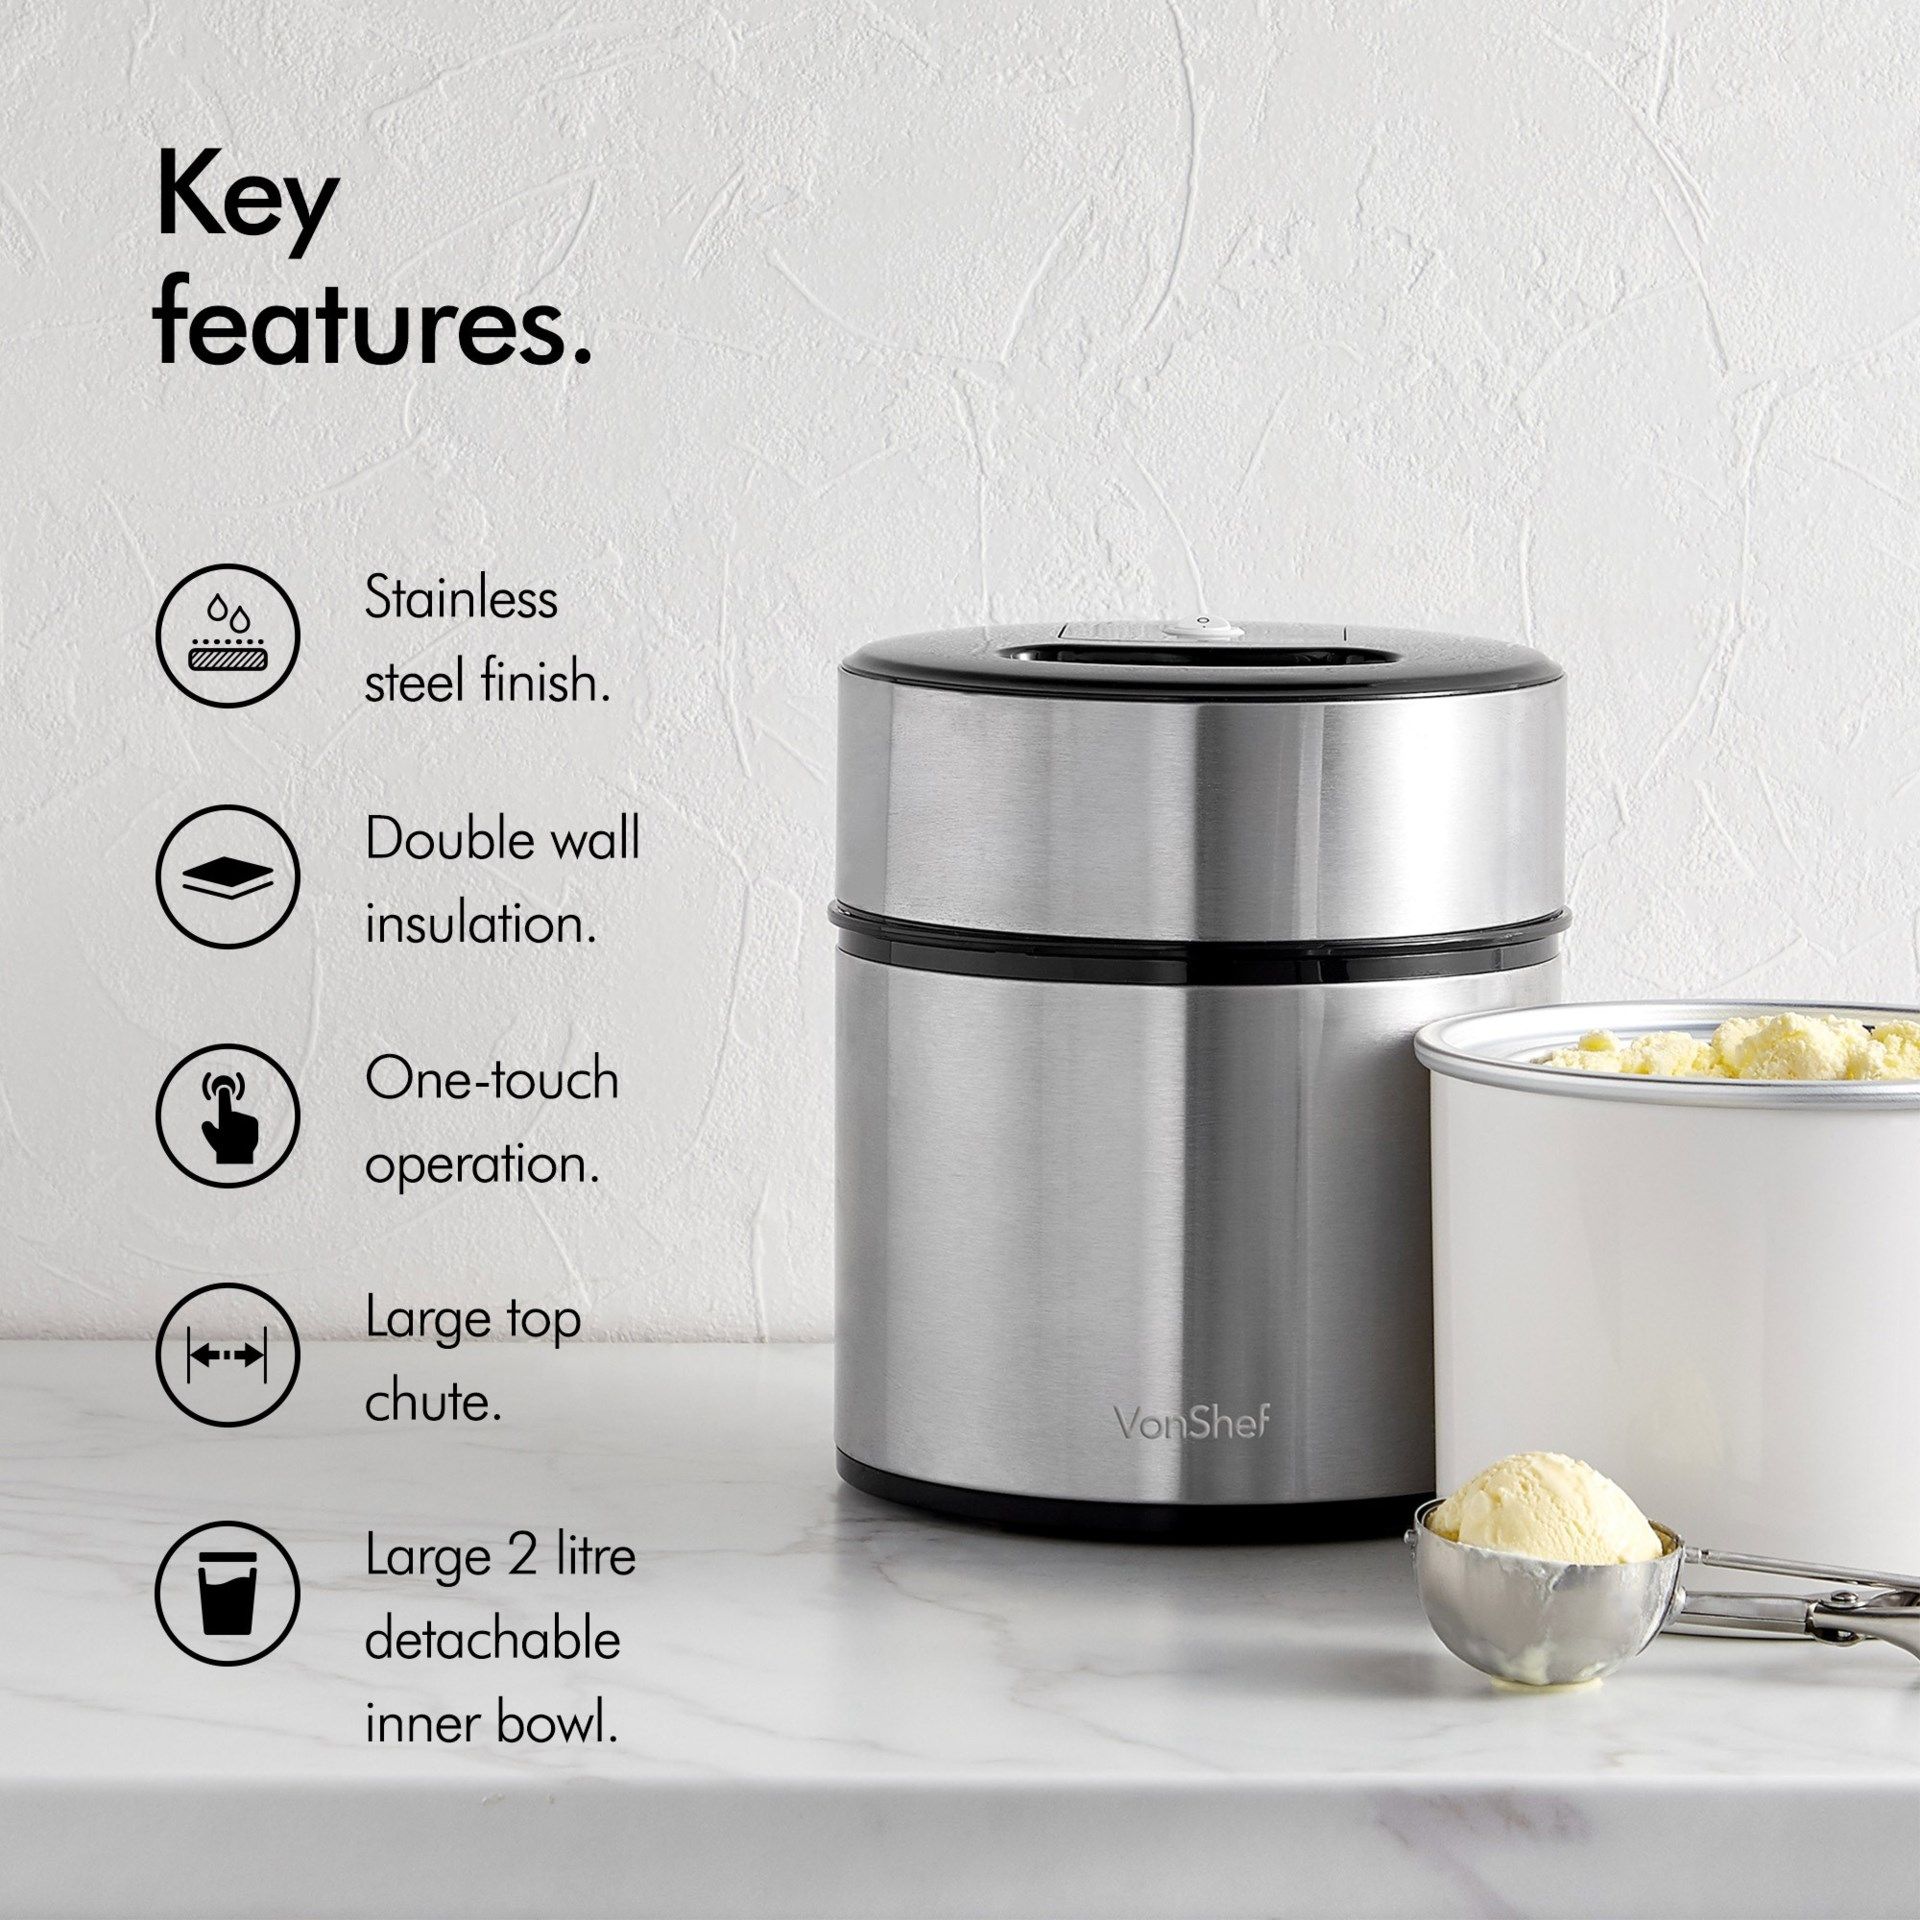 (S297) Stainless Steel Ice Cream Maker Machine with Detachable Bowl 2L Capacity TASTY HOMEMADE ... - Image 3 of 4